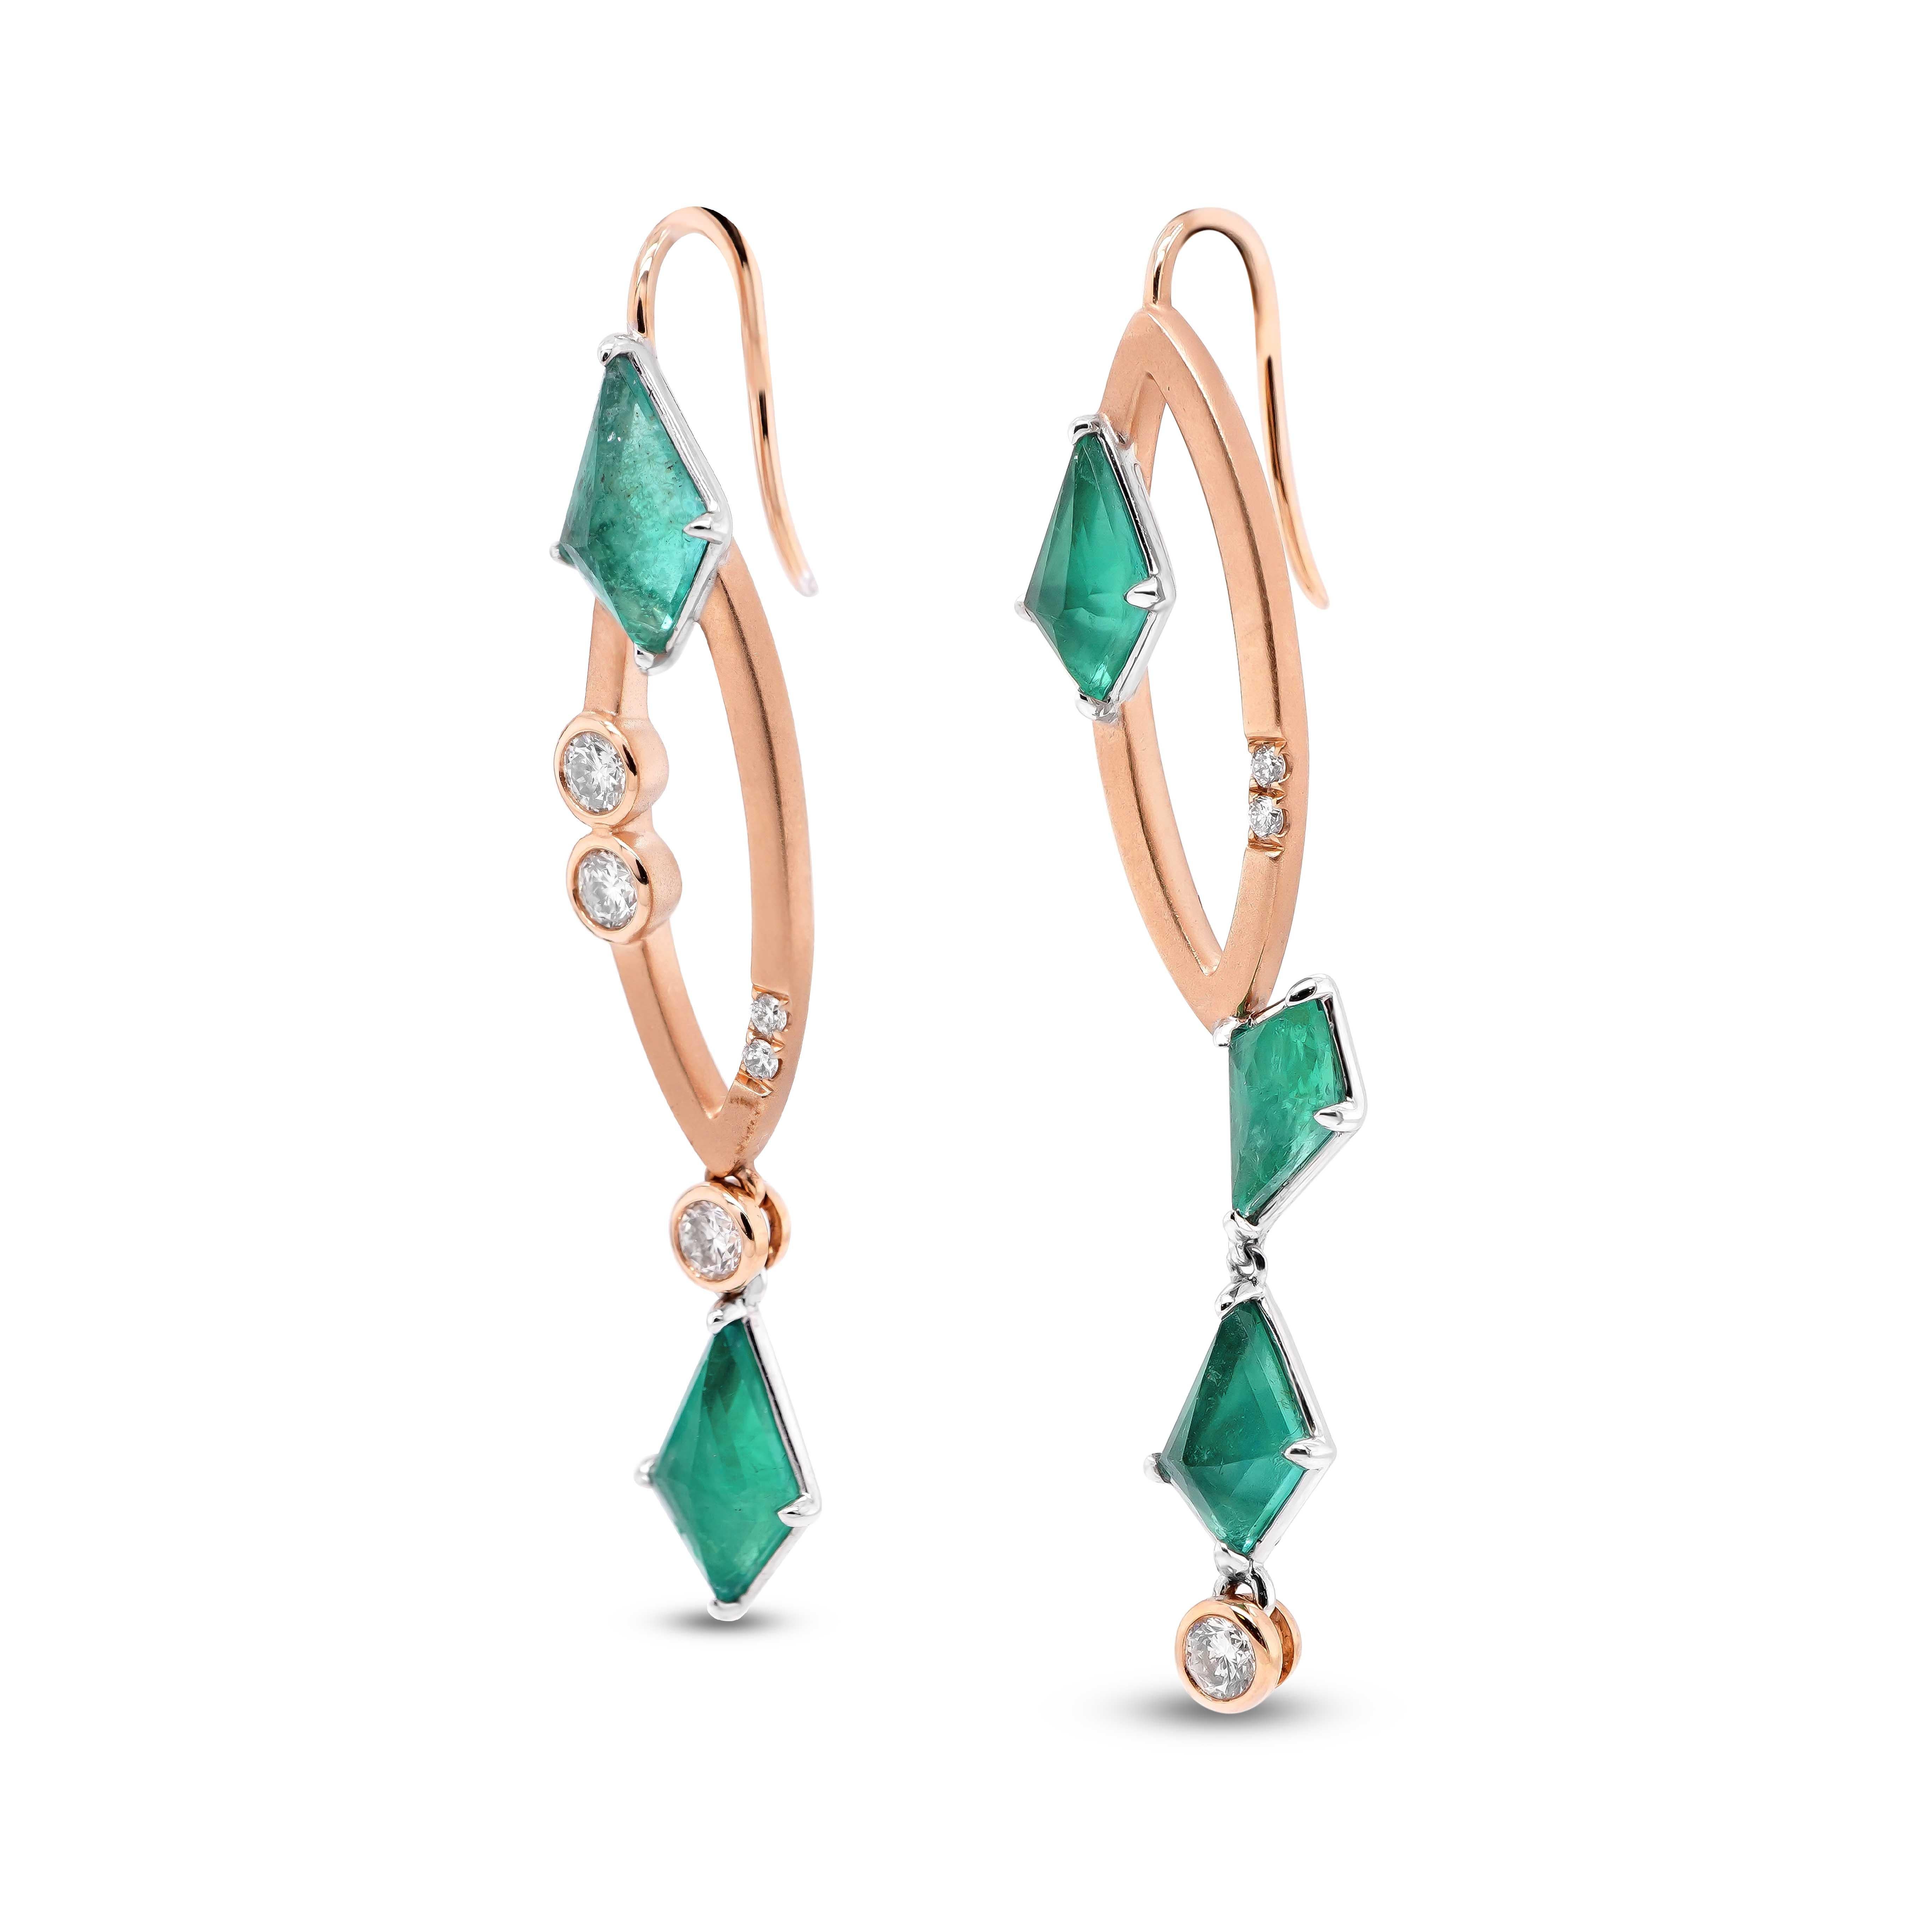 A pair of asymmetrical earrings comprising of kite shaped emeralds and white diamonds. A total of 3.35 carat of elegant long cut kite shaped emerald are set with 0.44 carat of white brilliant round diamond.
These green hued gemstones are formed due